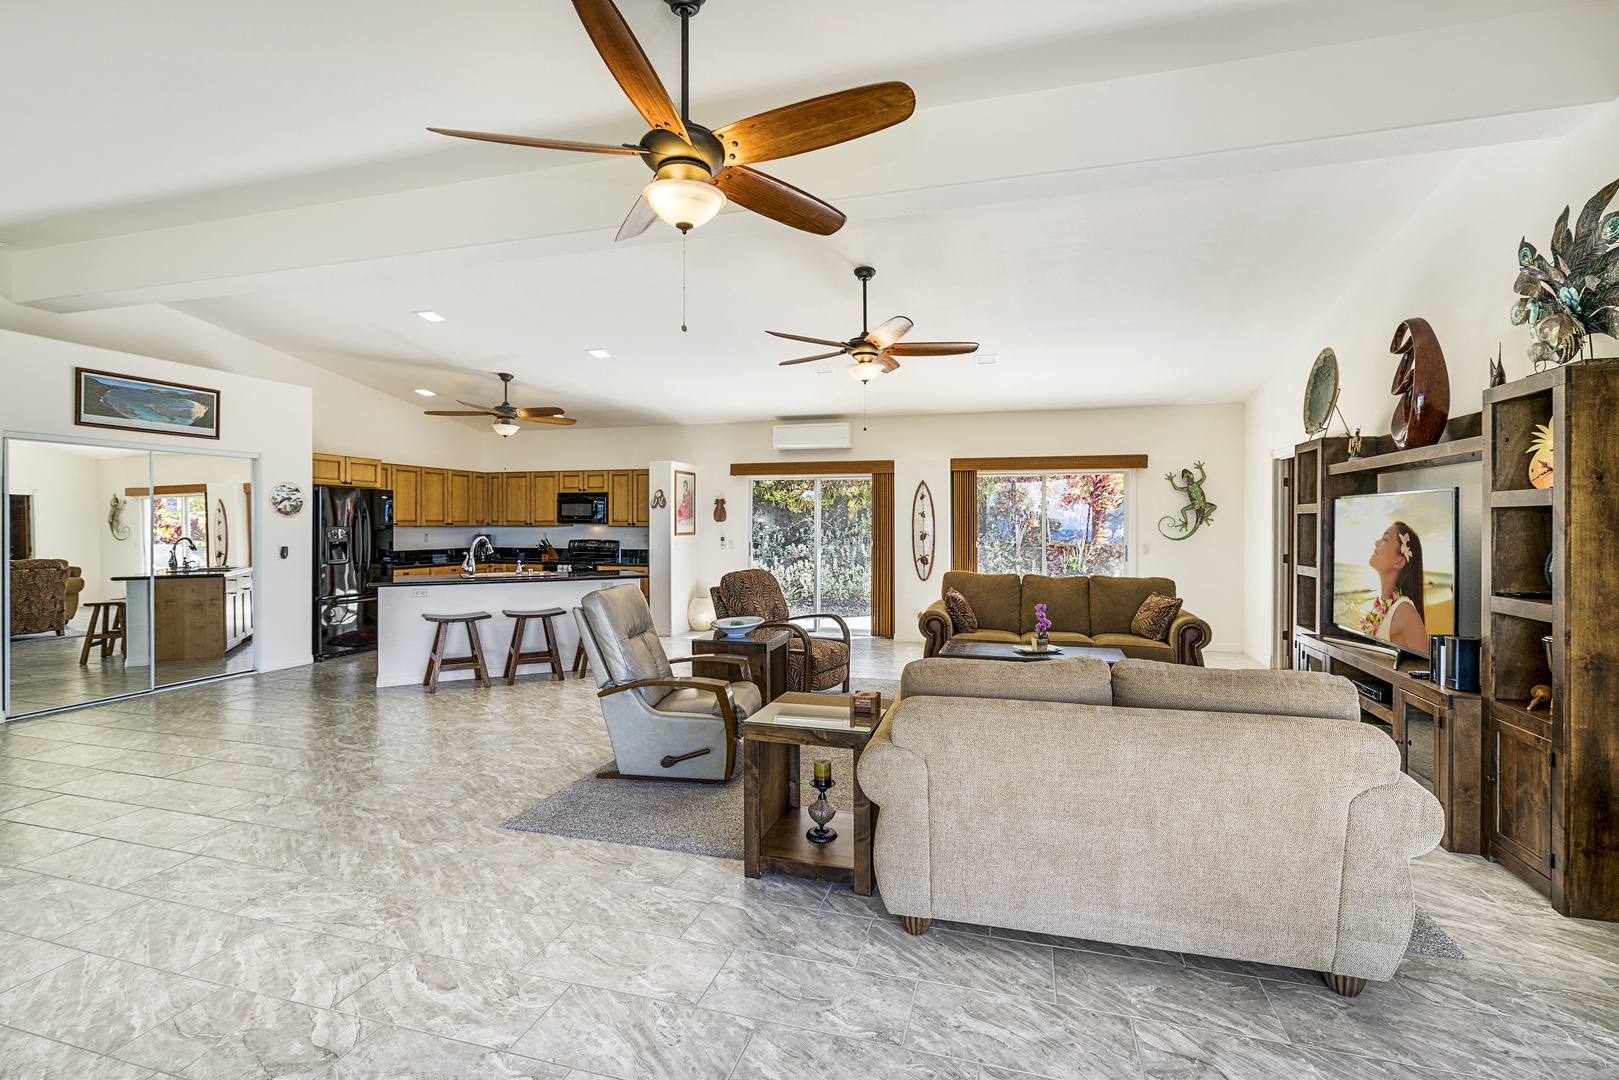 Kailua Kona Vacation Rentals, Maile Hale - Spacious living, dining, and kitchen areas